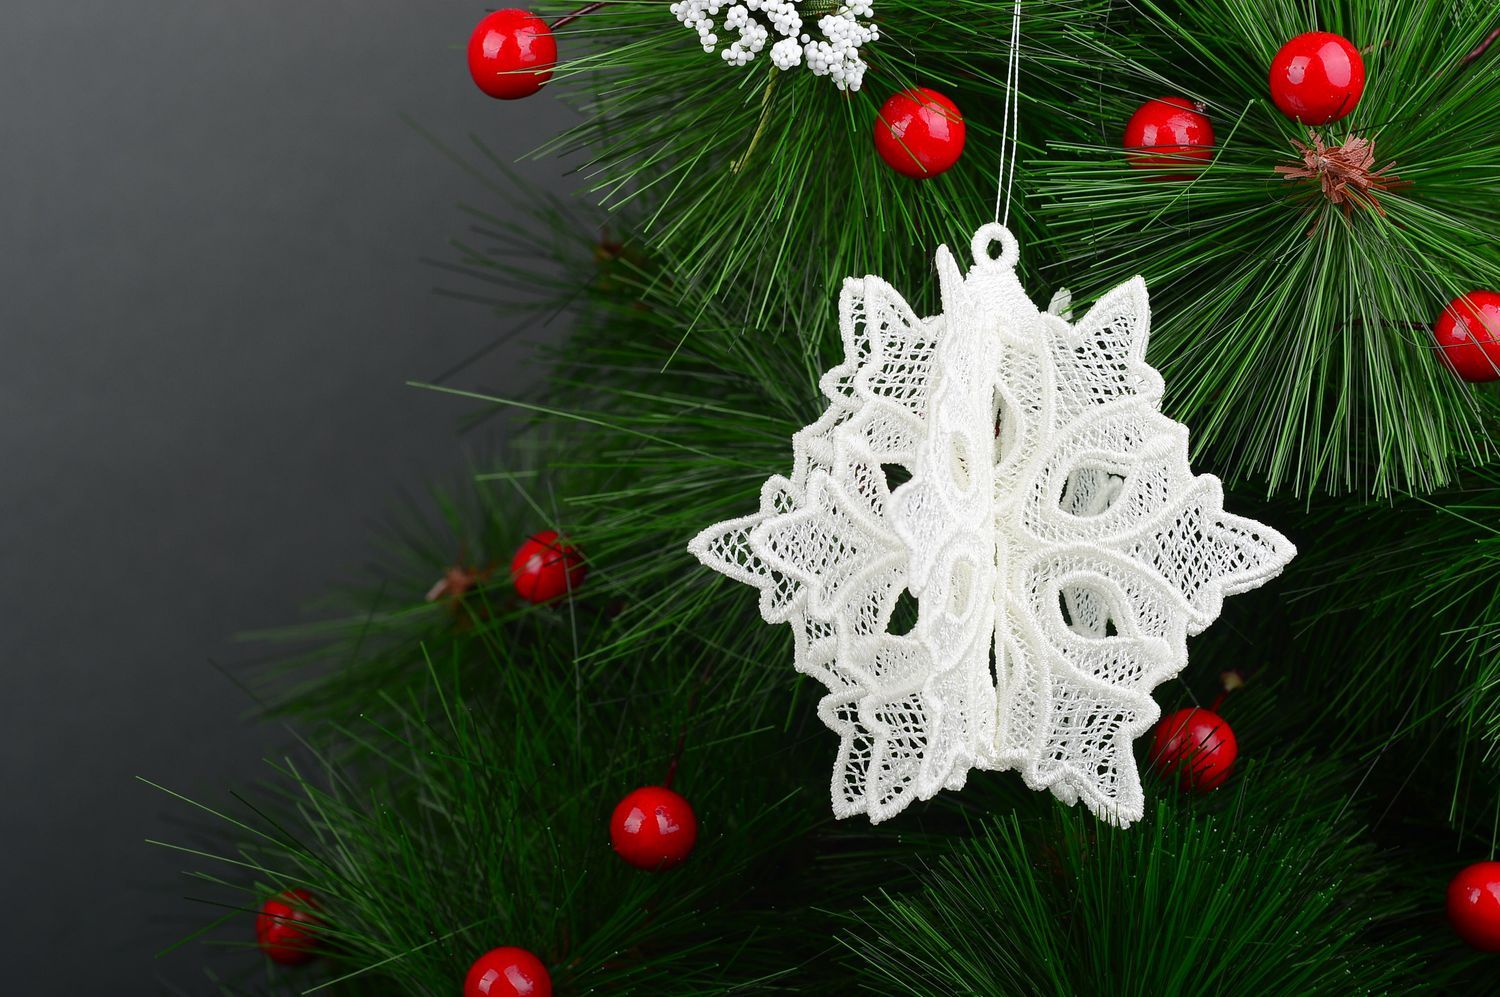 Snowflake Christmas toy lace toy openwork Christmas toy decorative use only photo 1